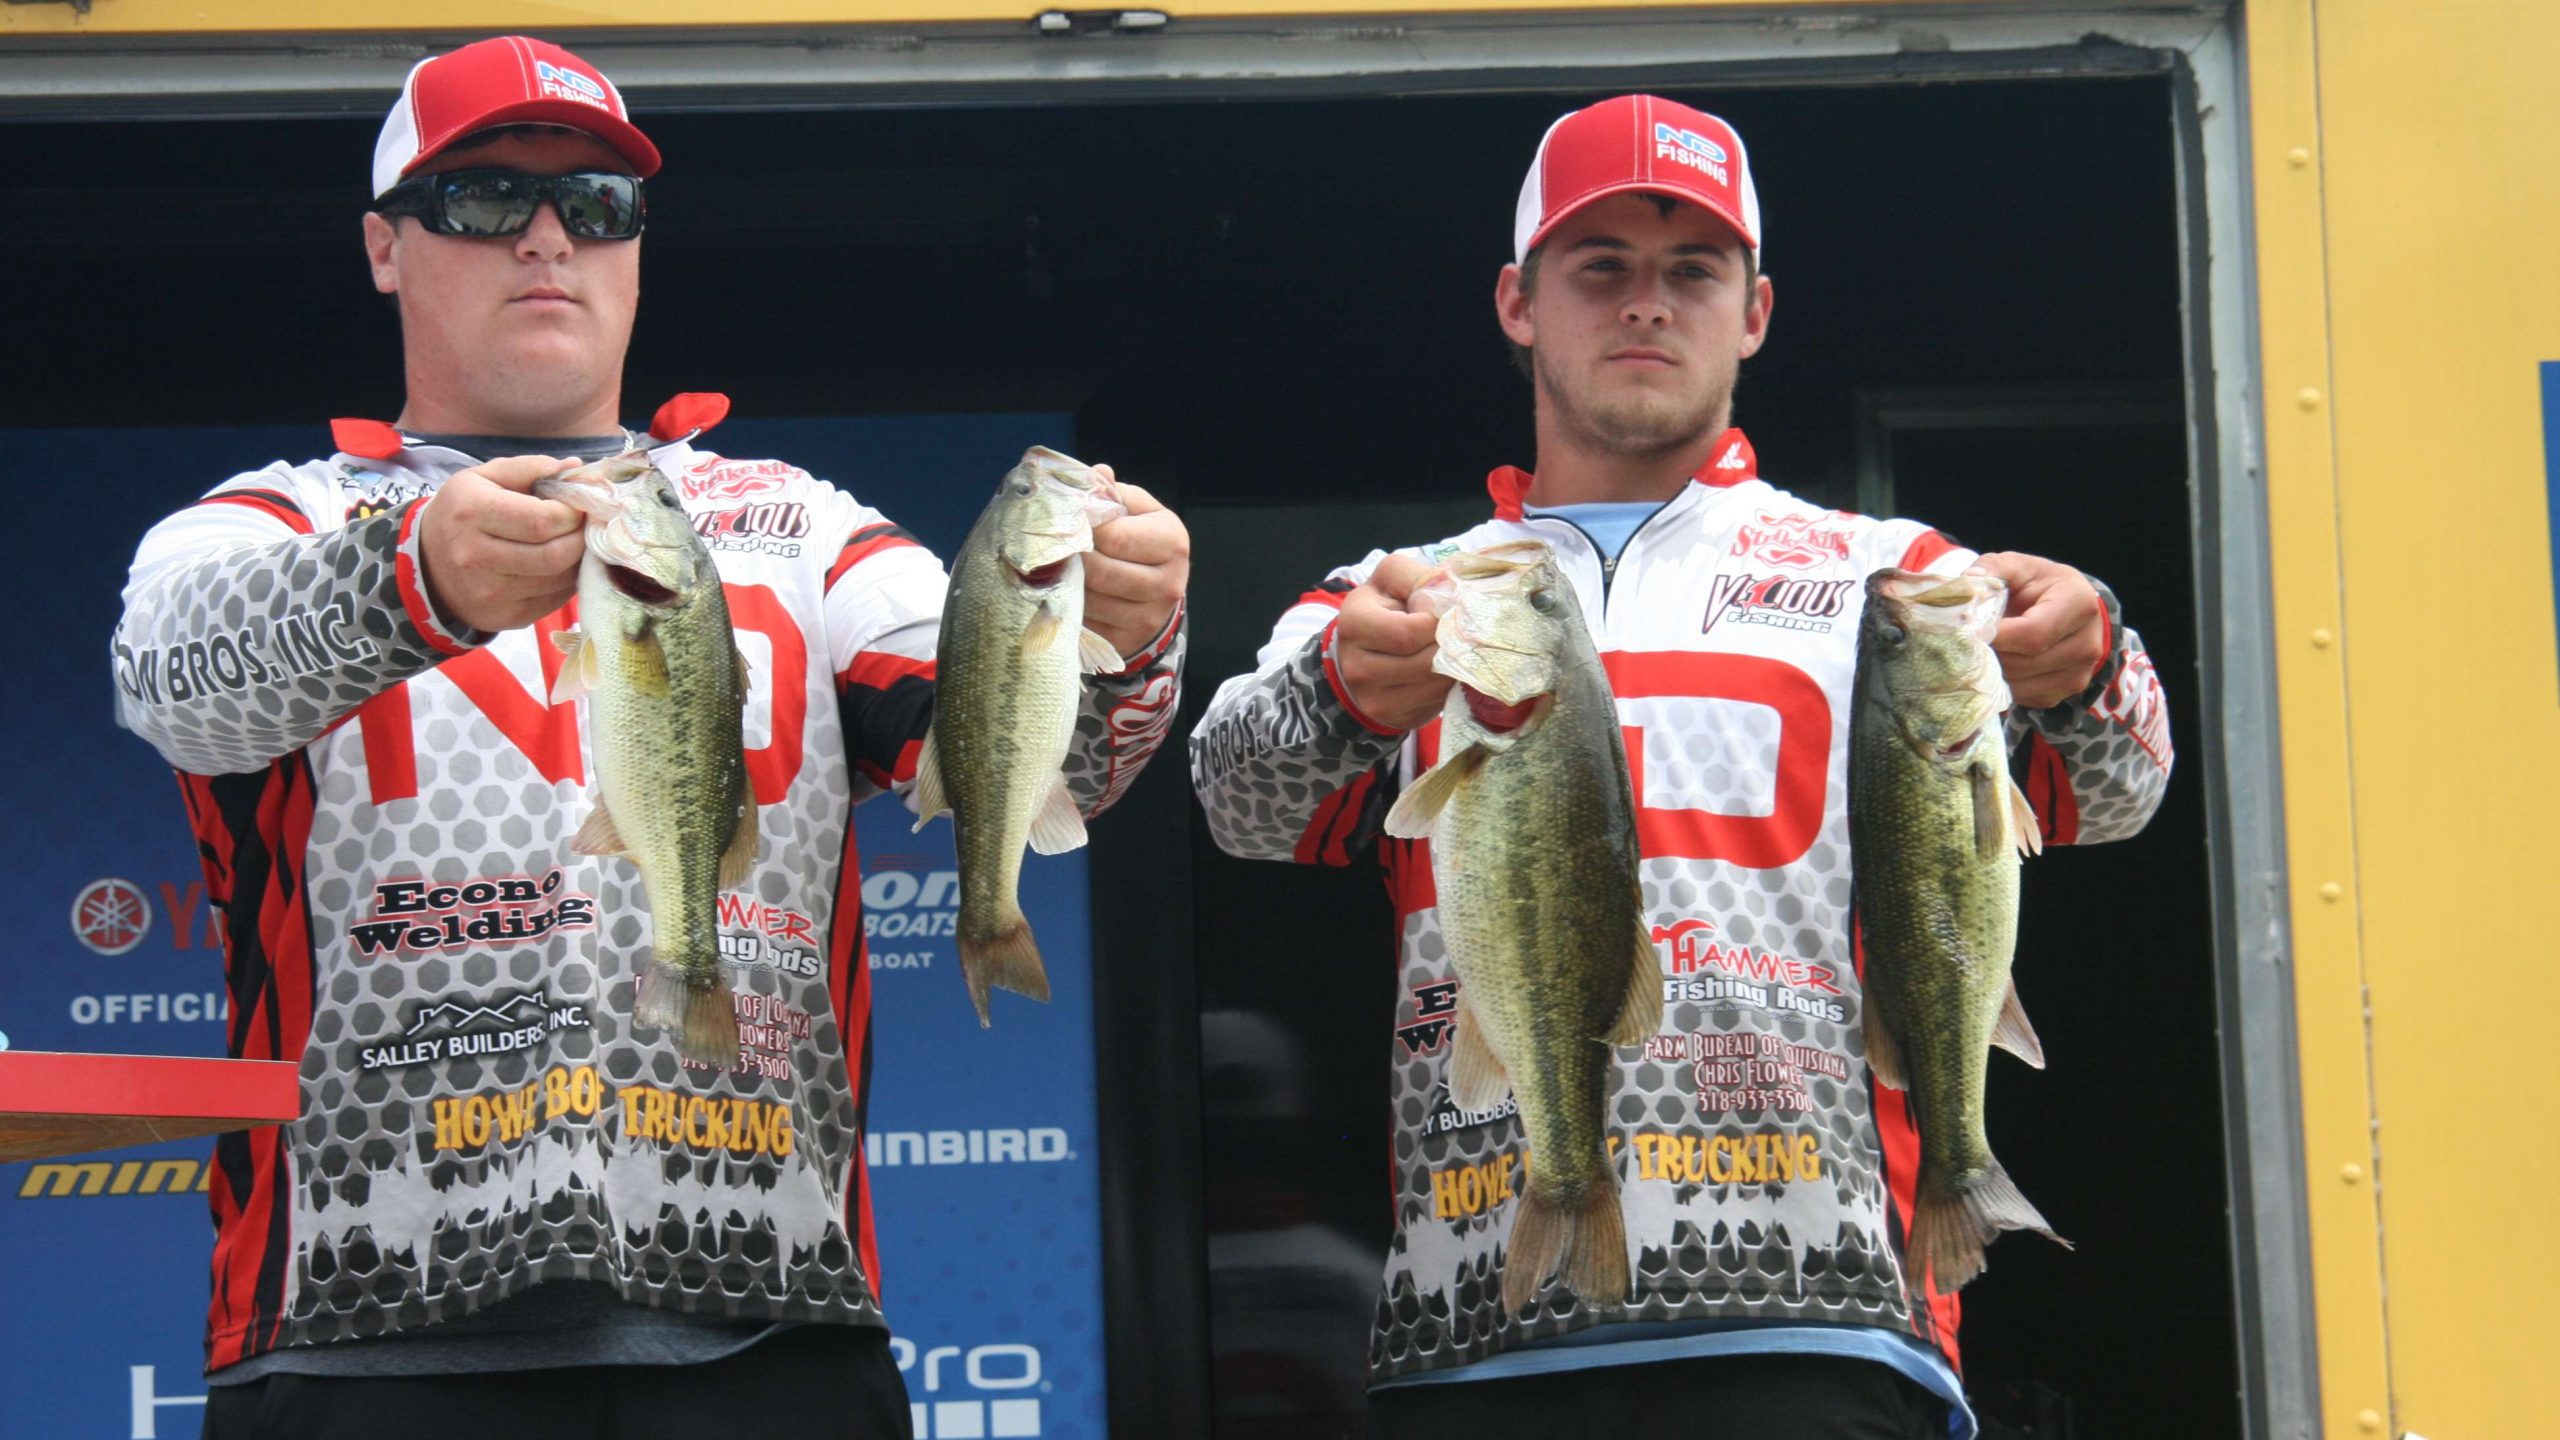 Kole Greer and Kyler Radford are part of the North DeSoto team which is just up the road from Cypress Bend Park. They looked good on their home waters, and placed seventh with a four-fish total of 11-14.